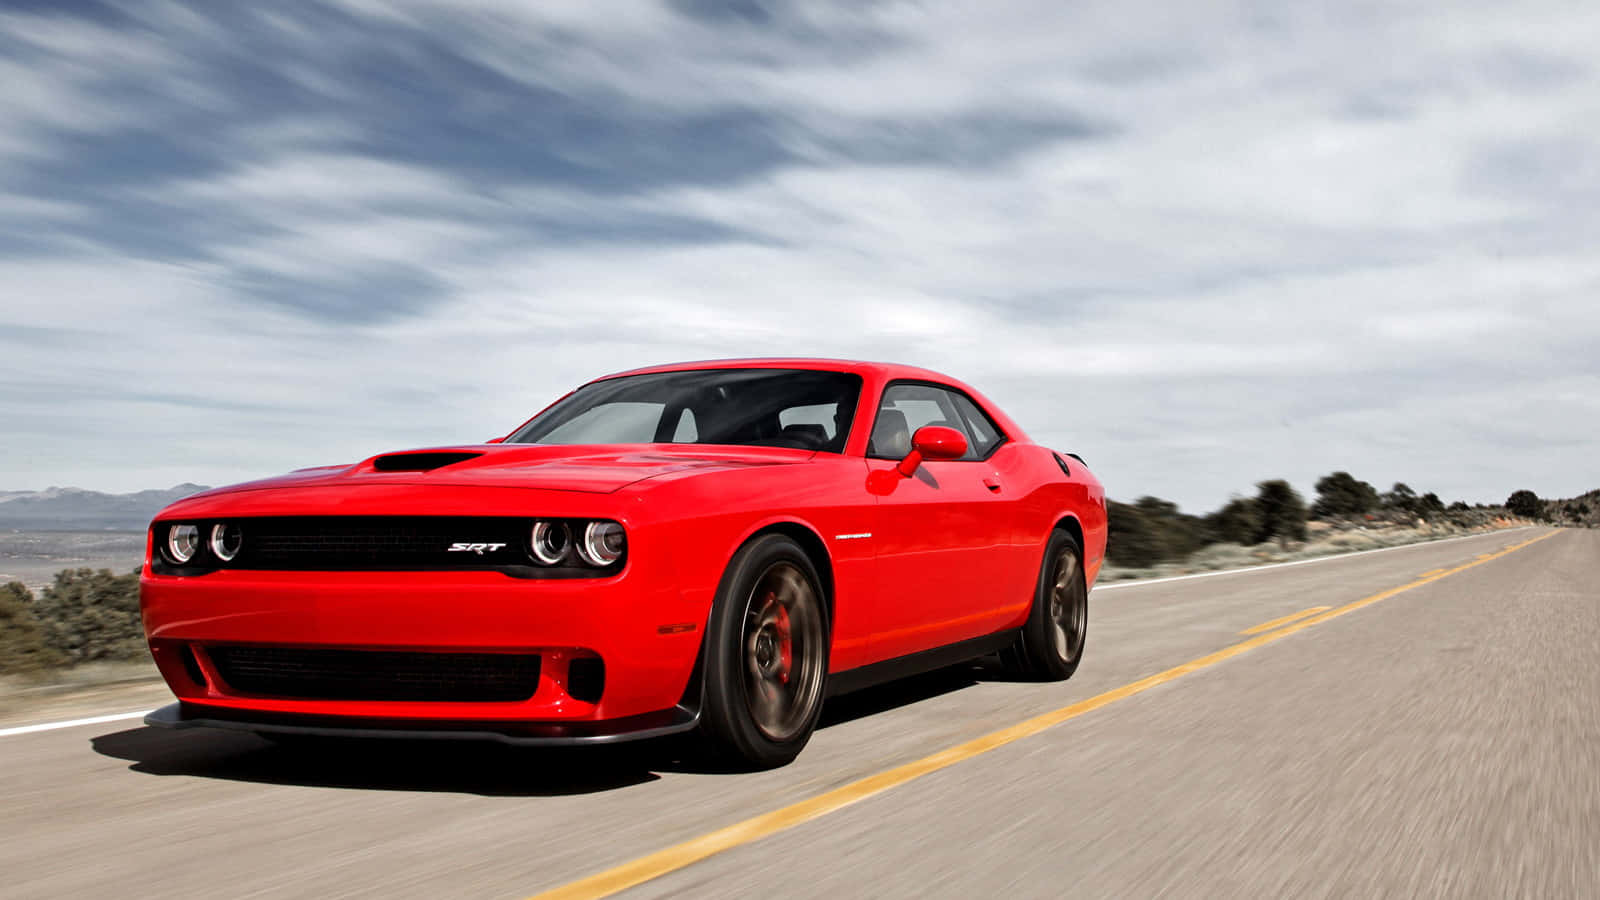 "Defy The Rules In The Dodge Hellcat" Wallpaper